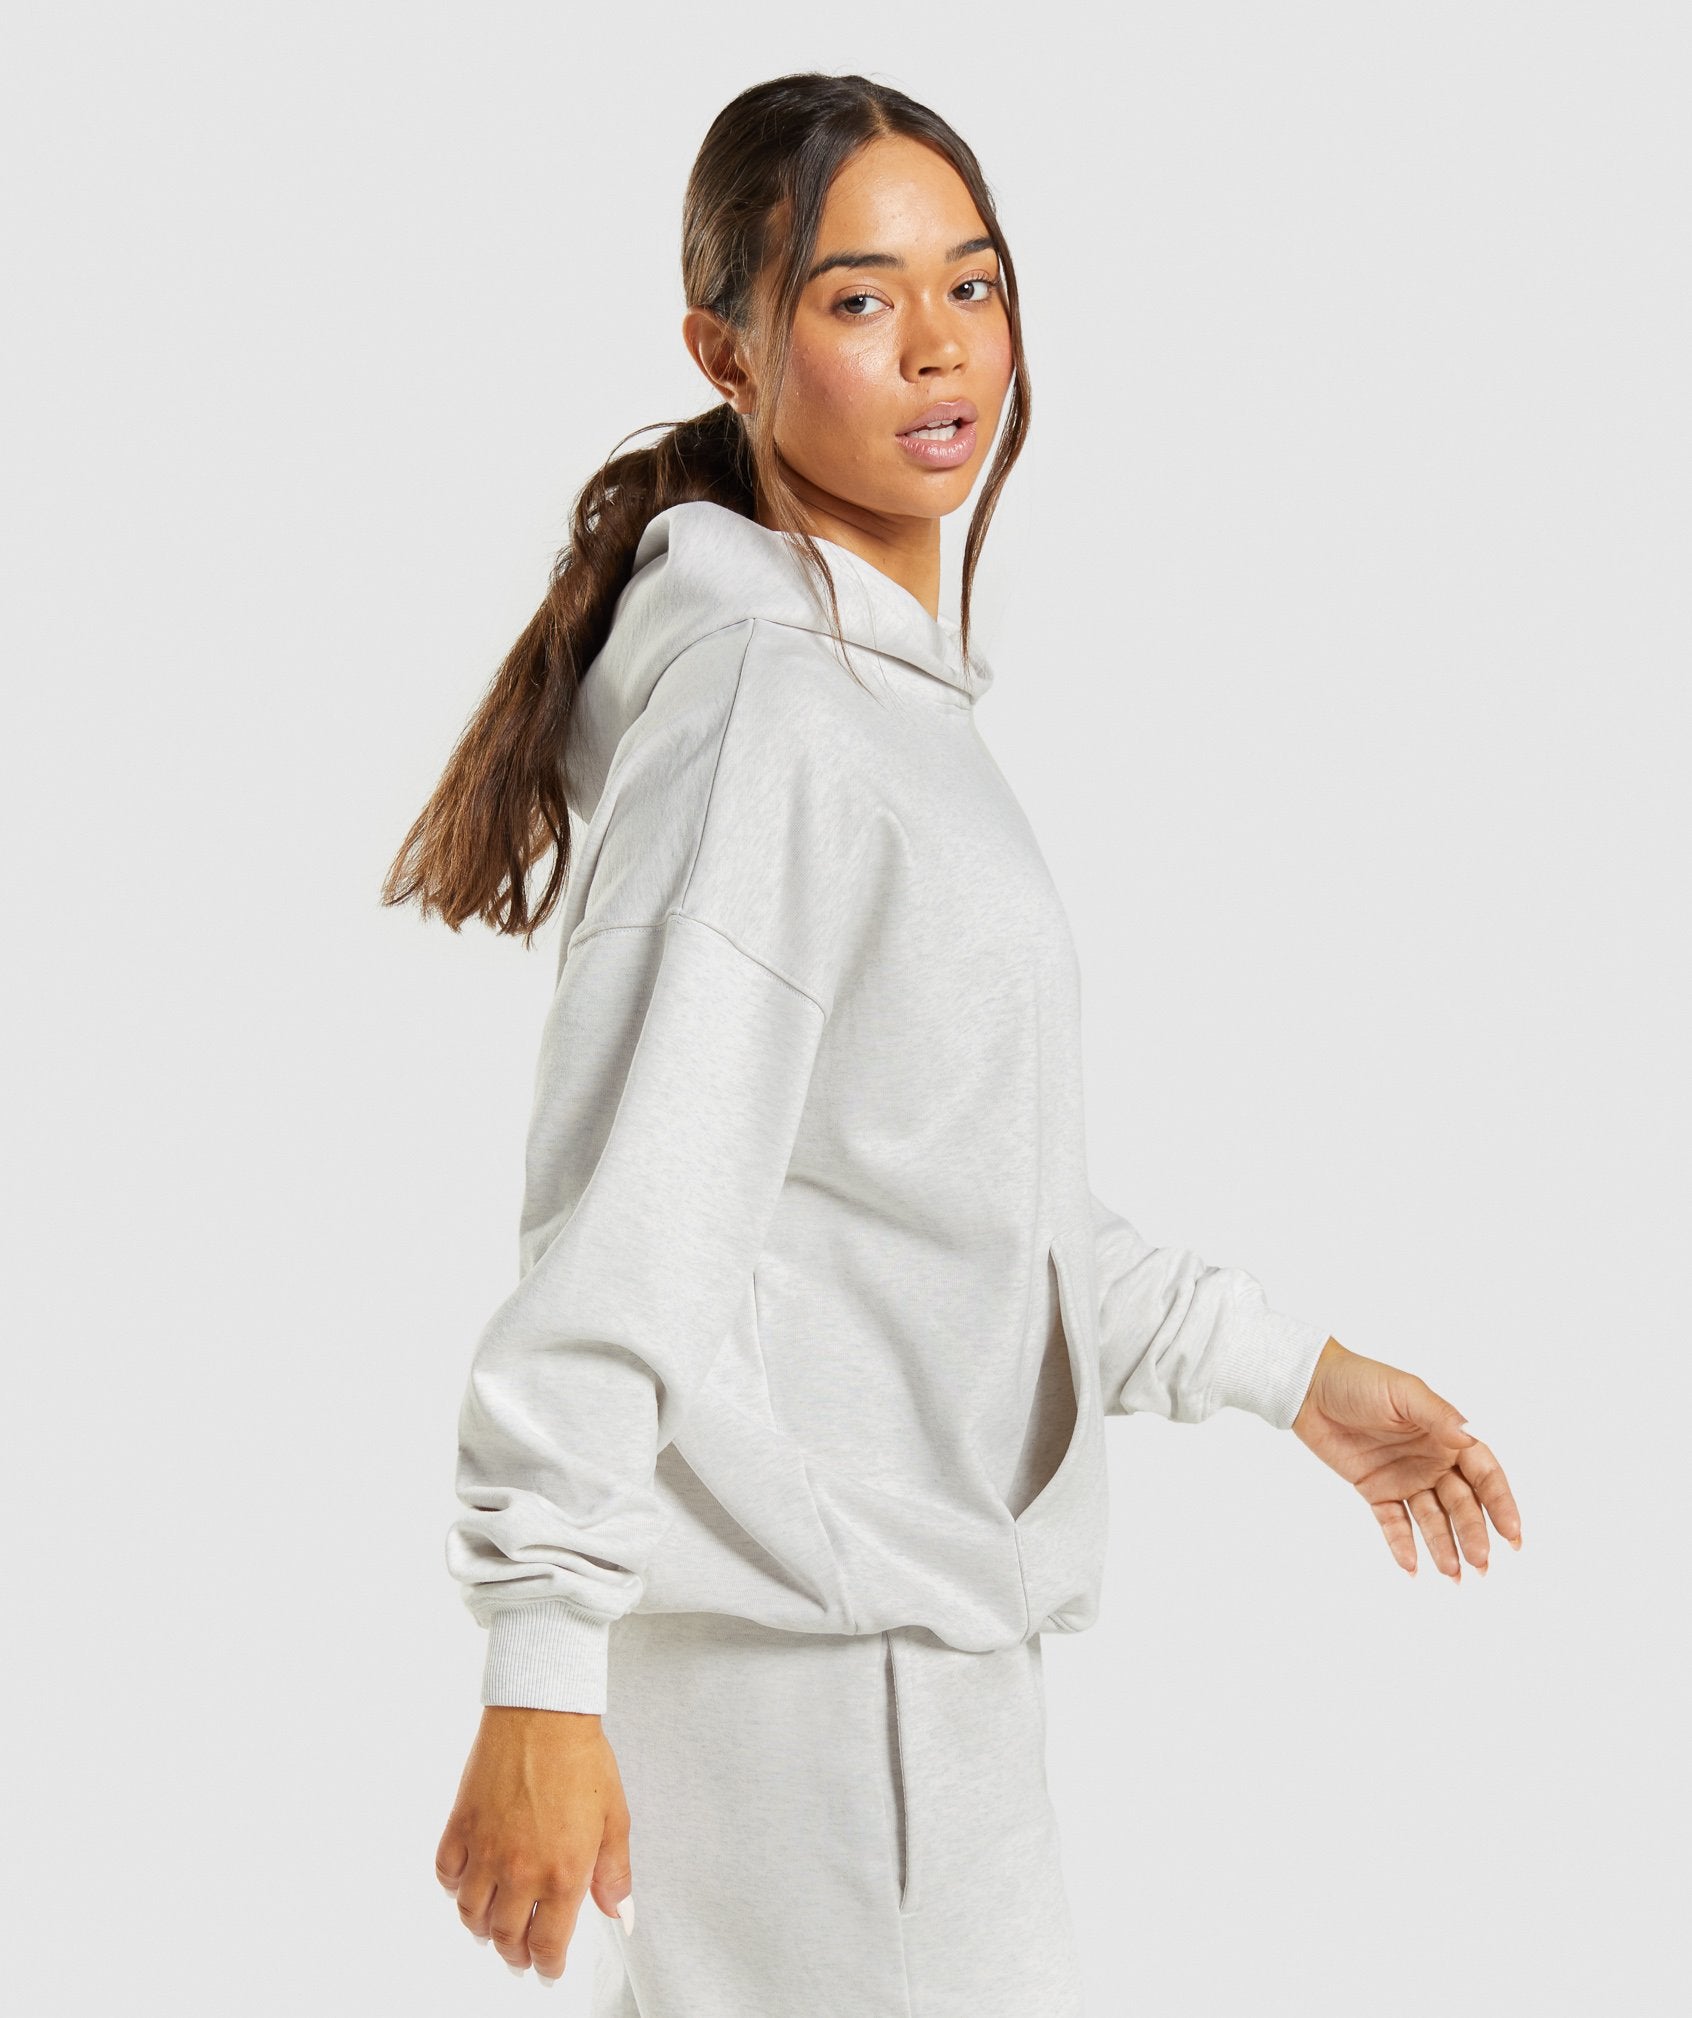 Rest Day Sweats Hoodie product image 3